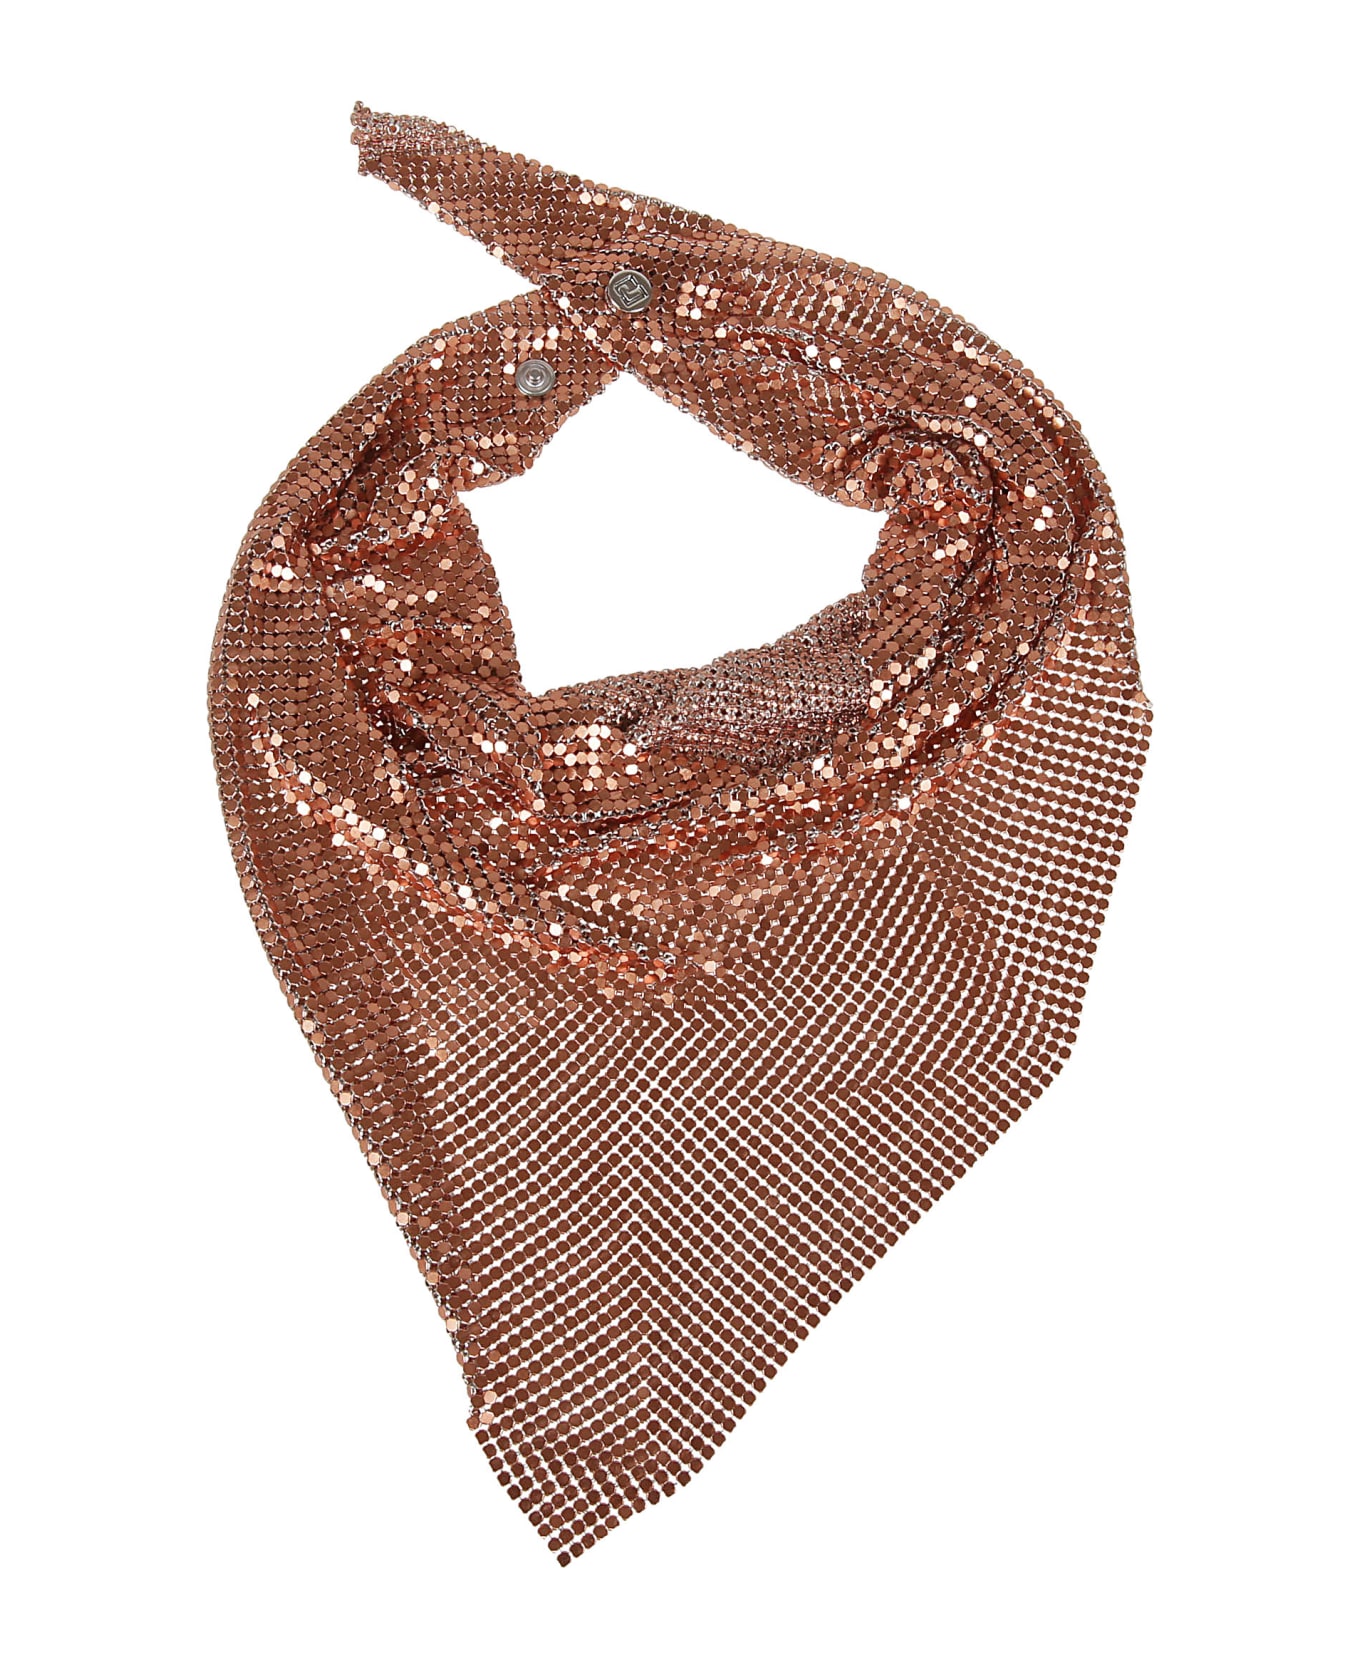 Paco Rabanne Pixel Scarf - Copper ネックレス